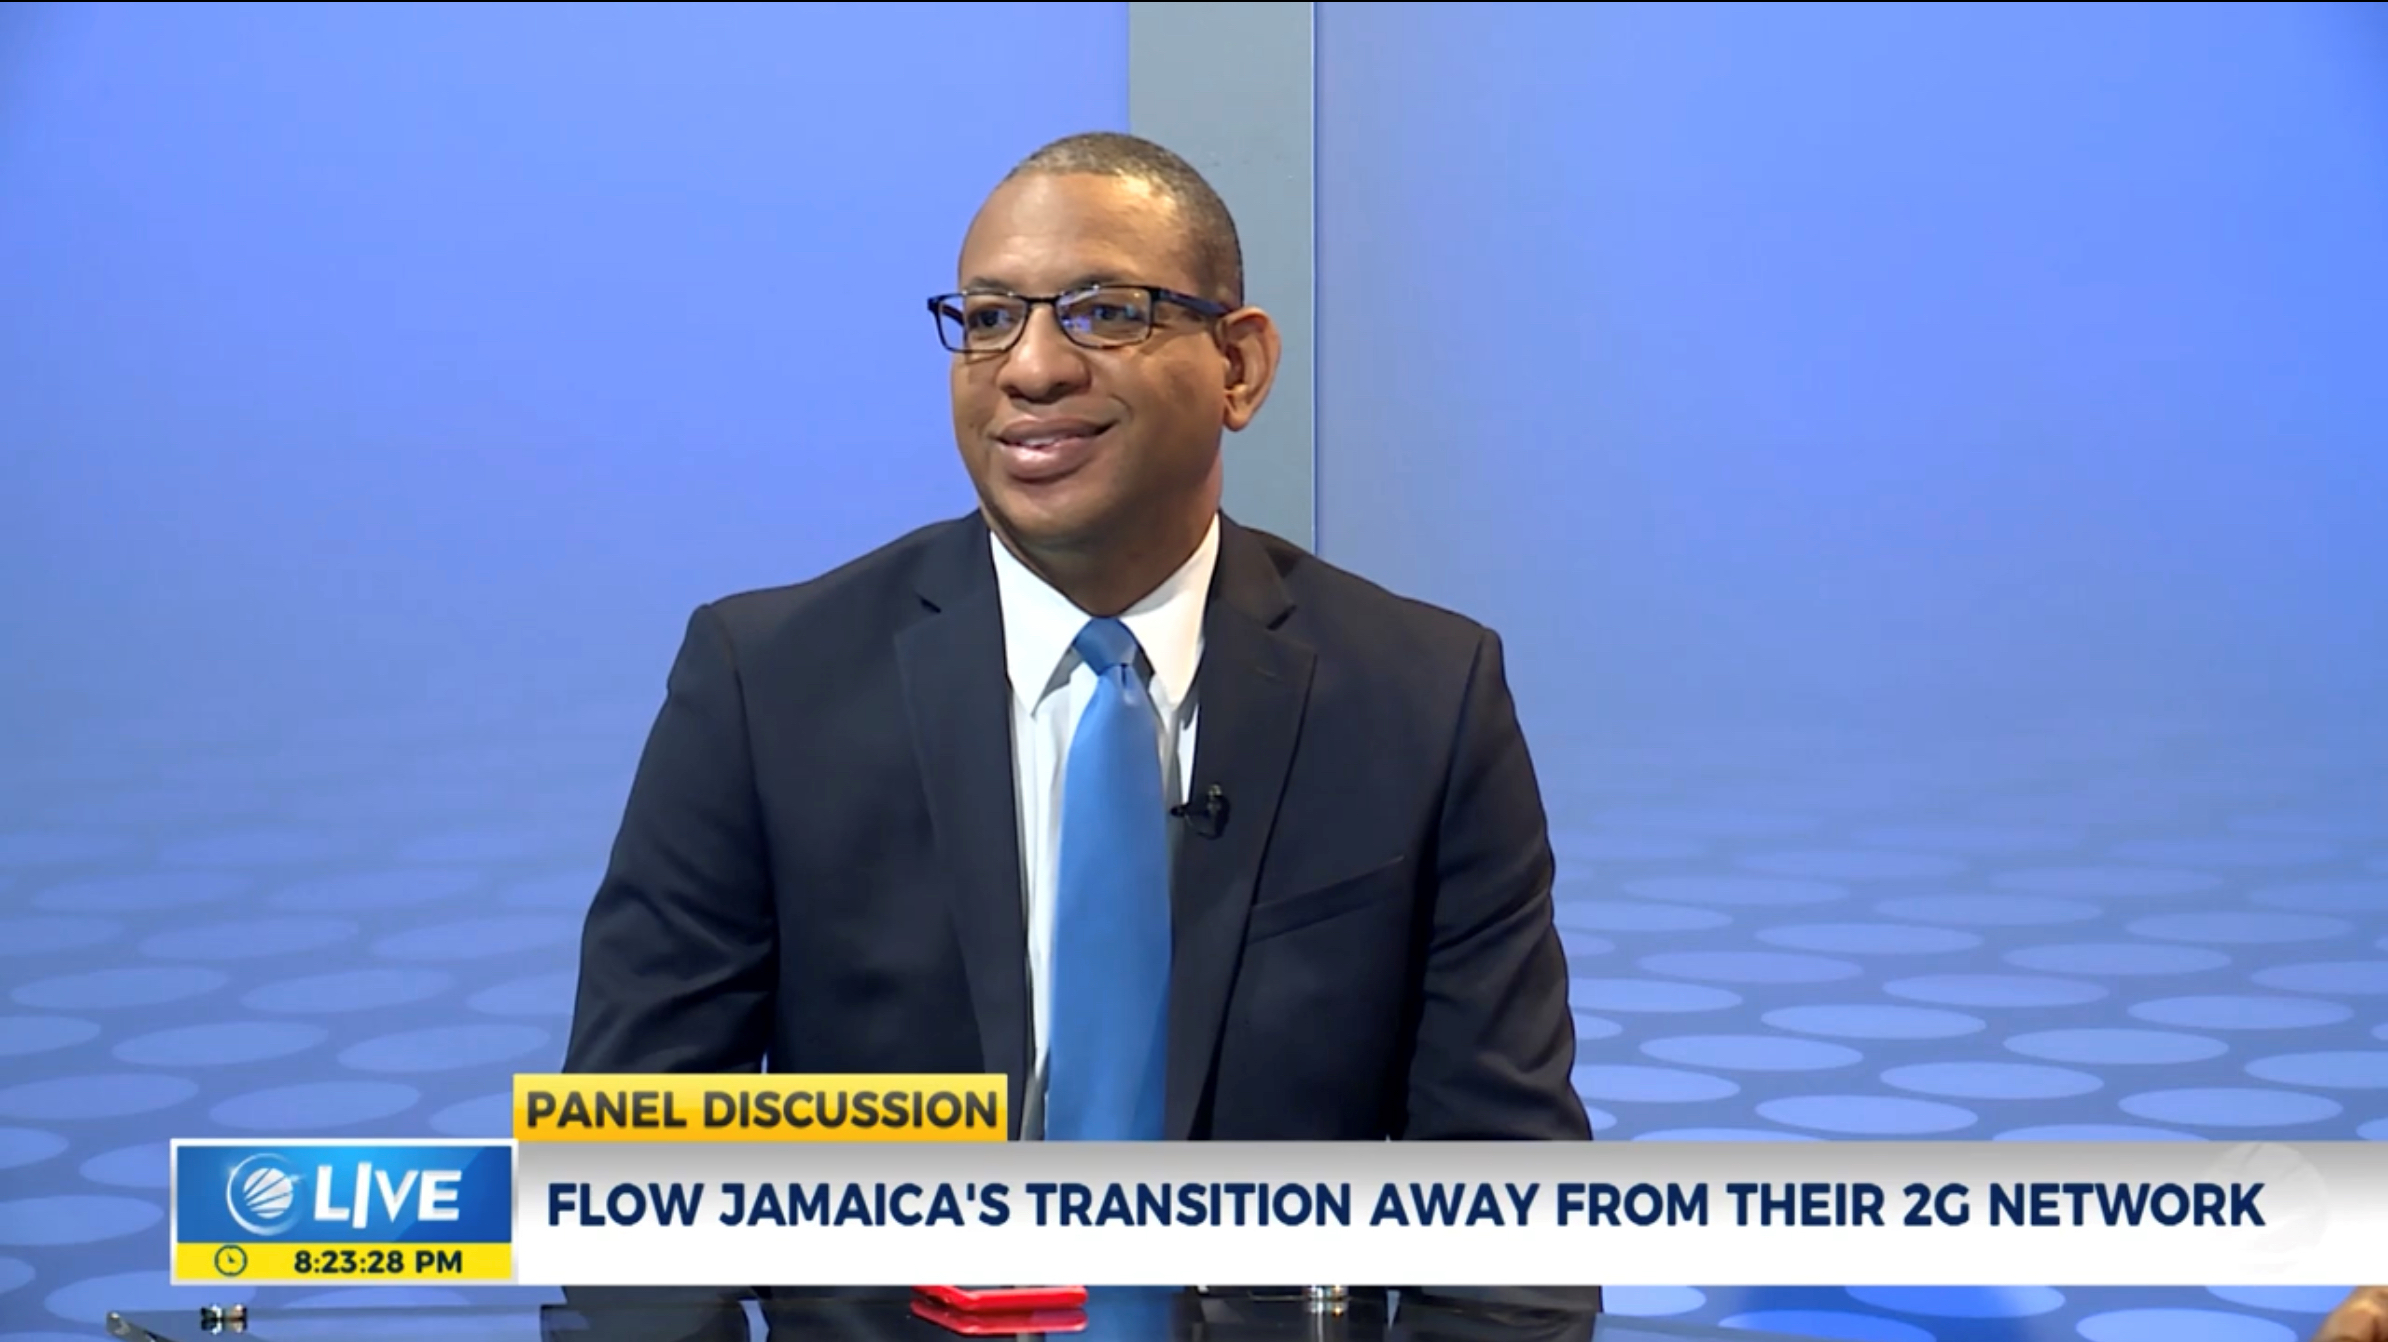 Exploring Flow Jamaica’s Transition from 2G Network